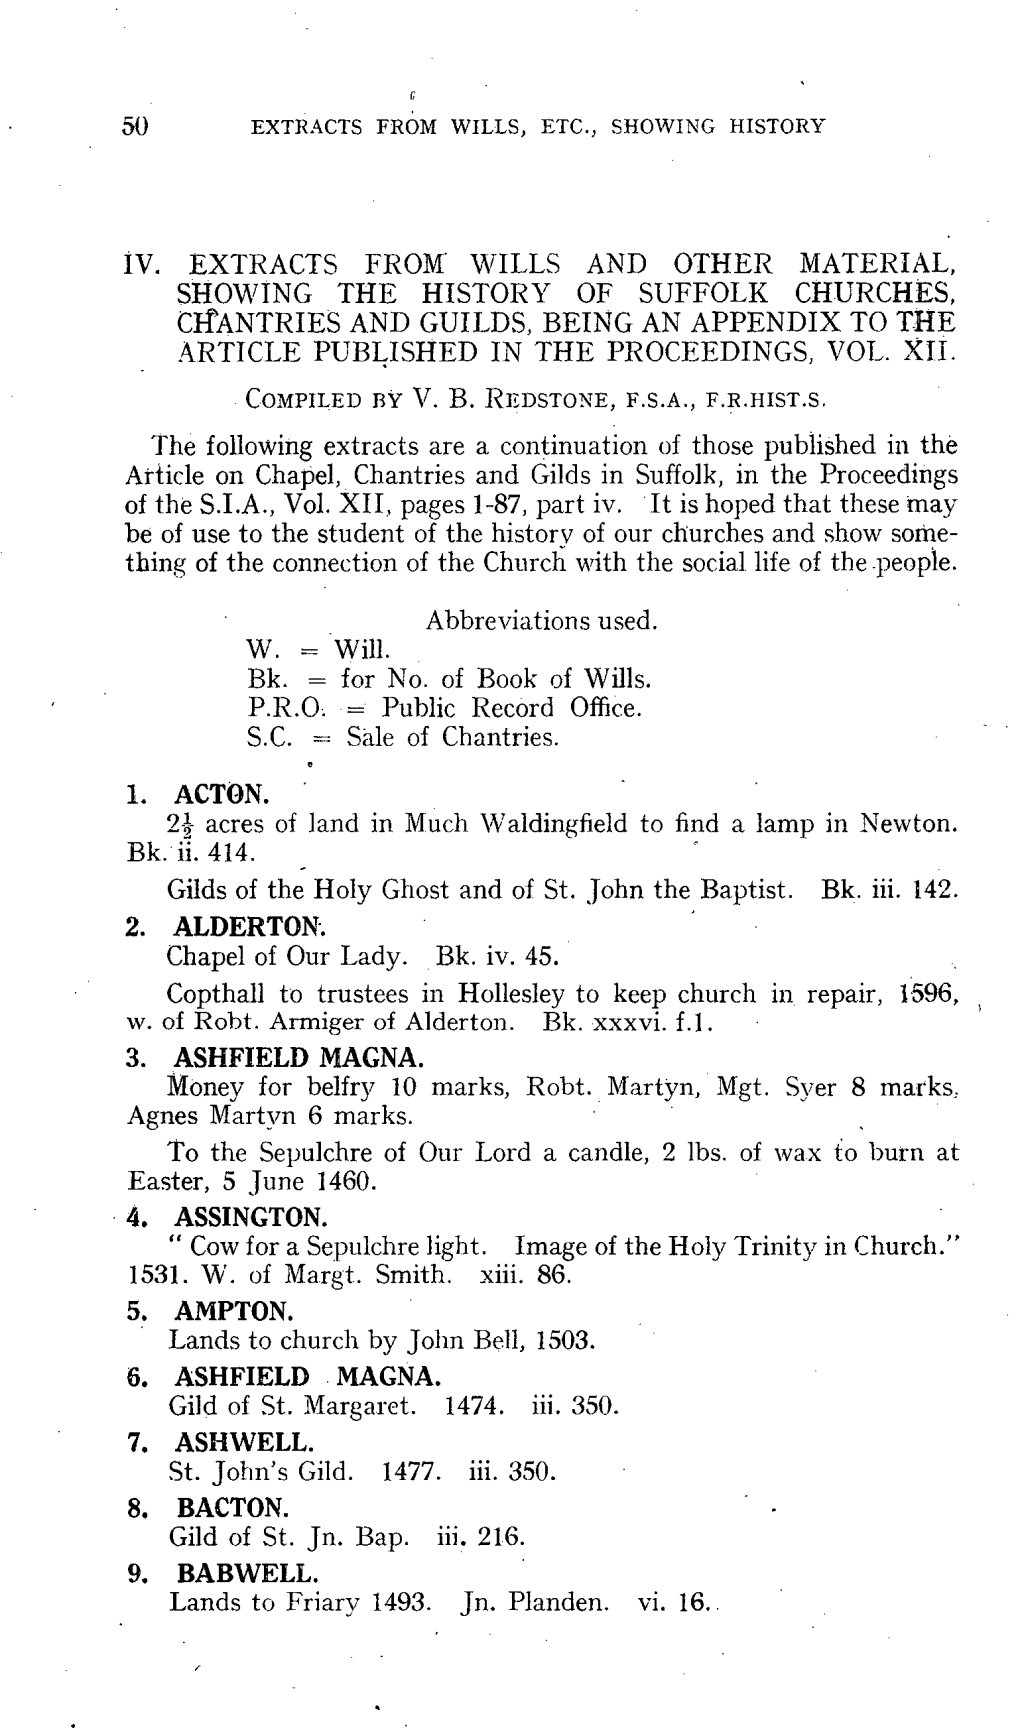 IV. Extracts from Wills and Other Material, Showing